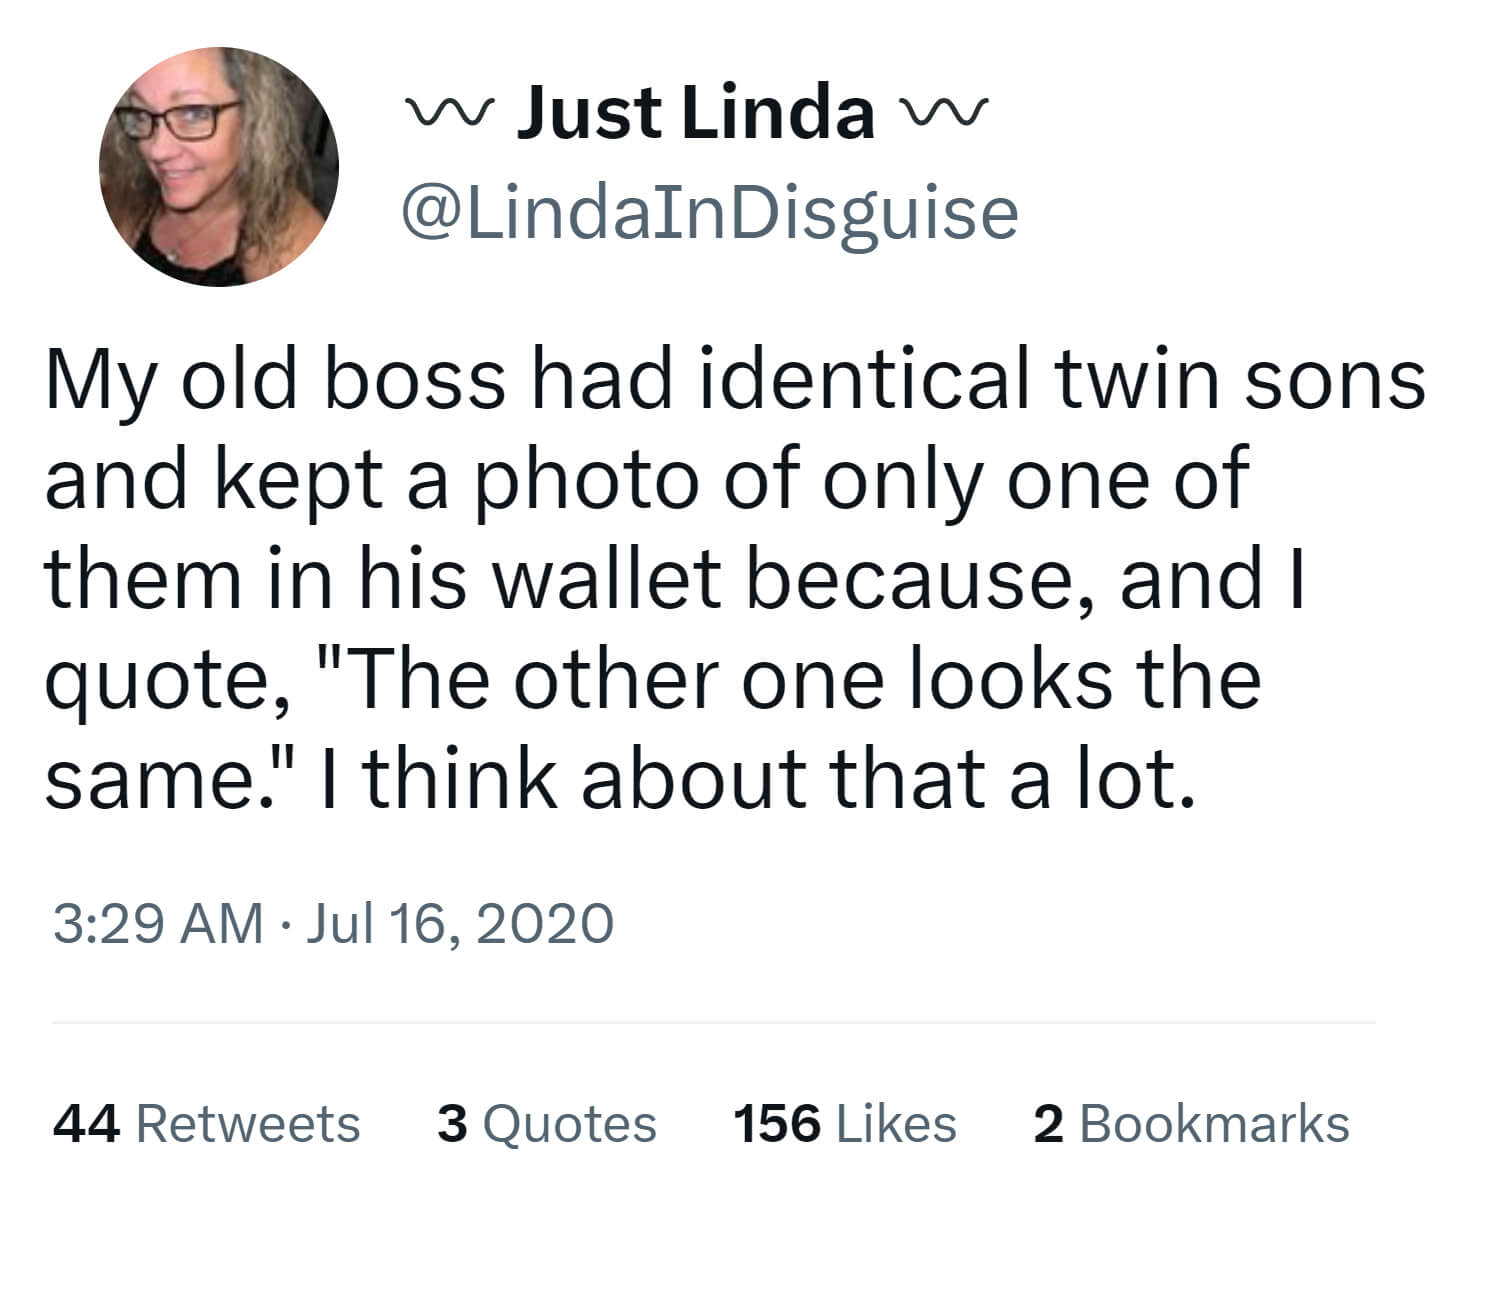 Tweets About Raising Twins